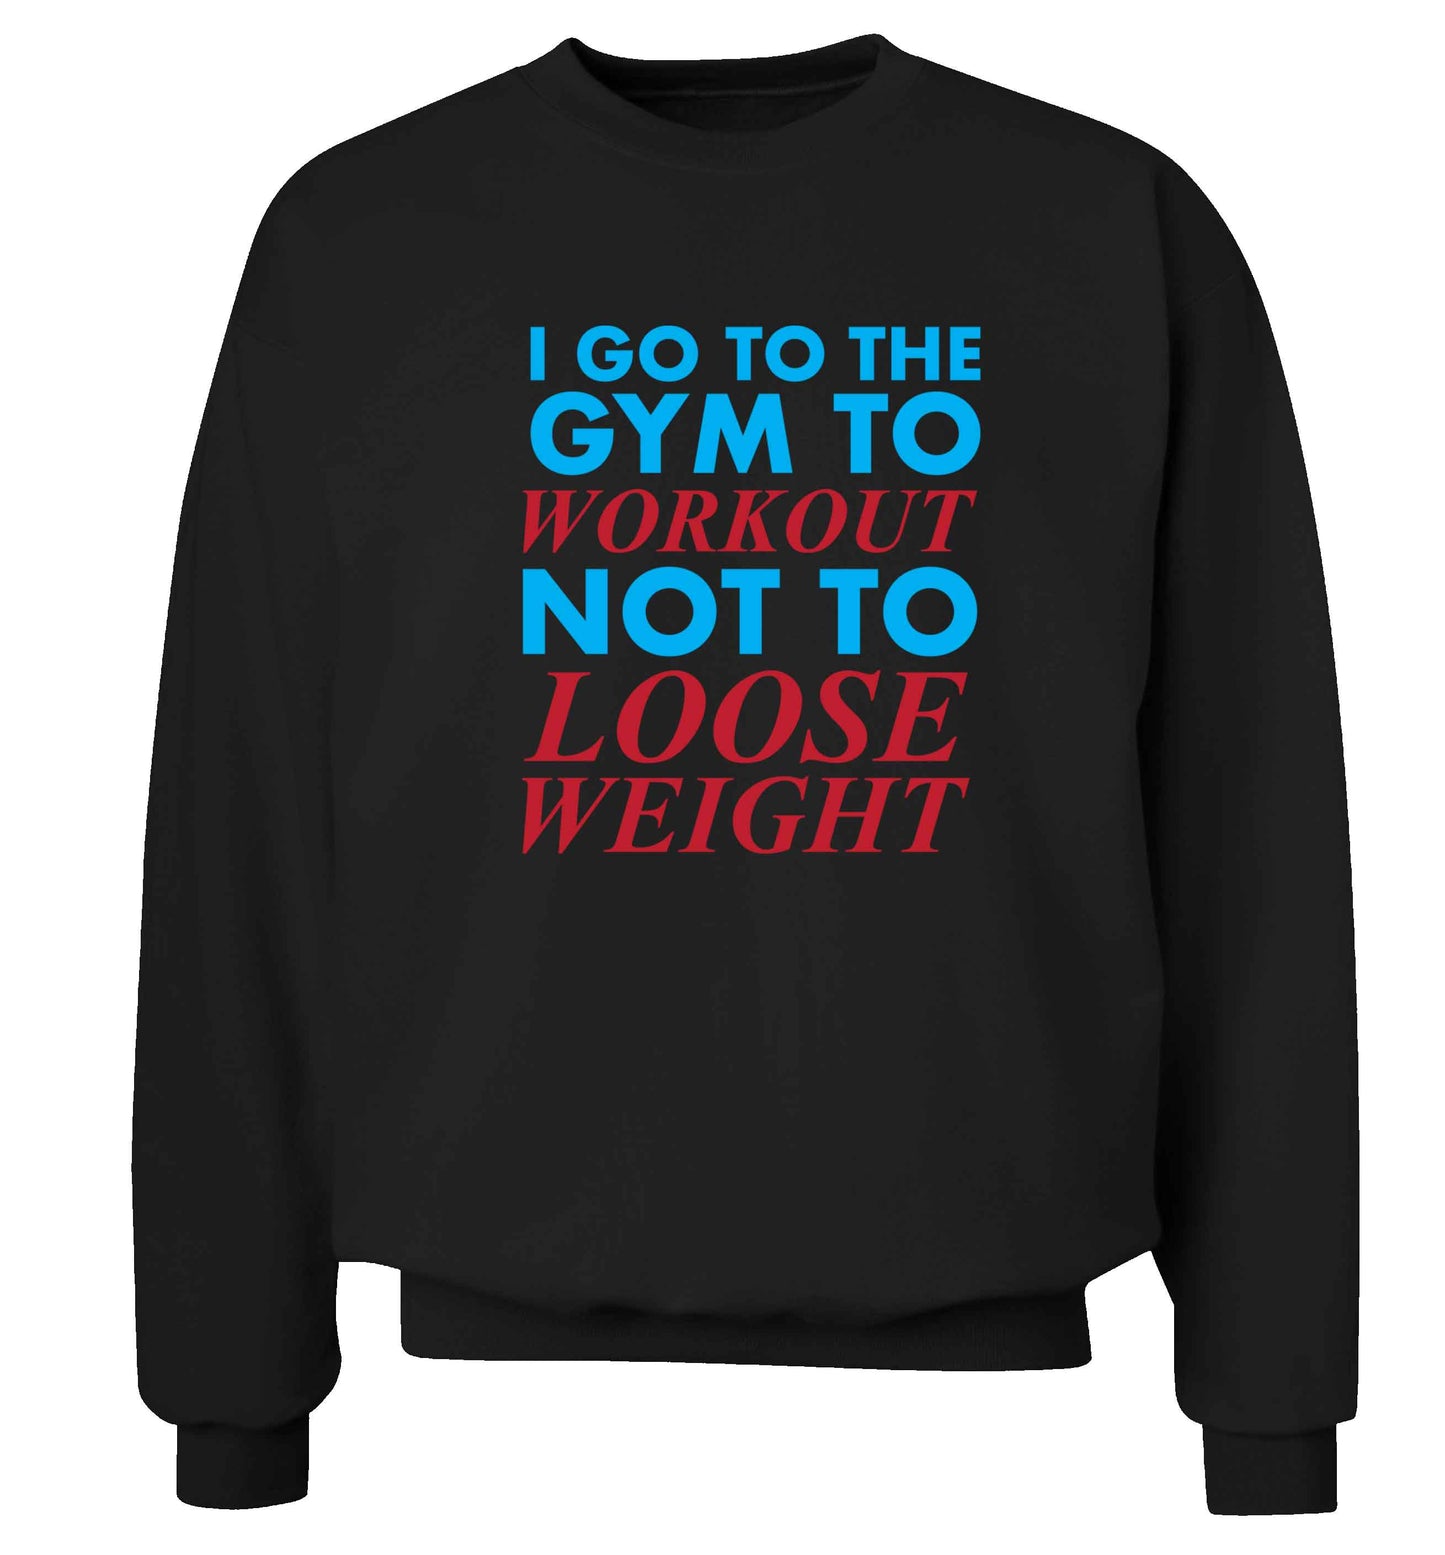 I go to the gym to workout not to loose weight adult's unisex black sweater 2XL